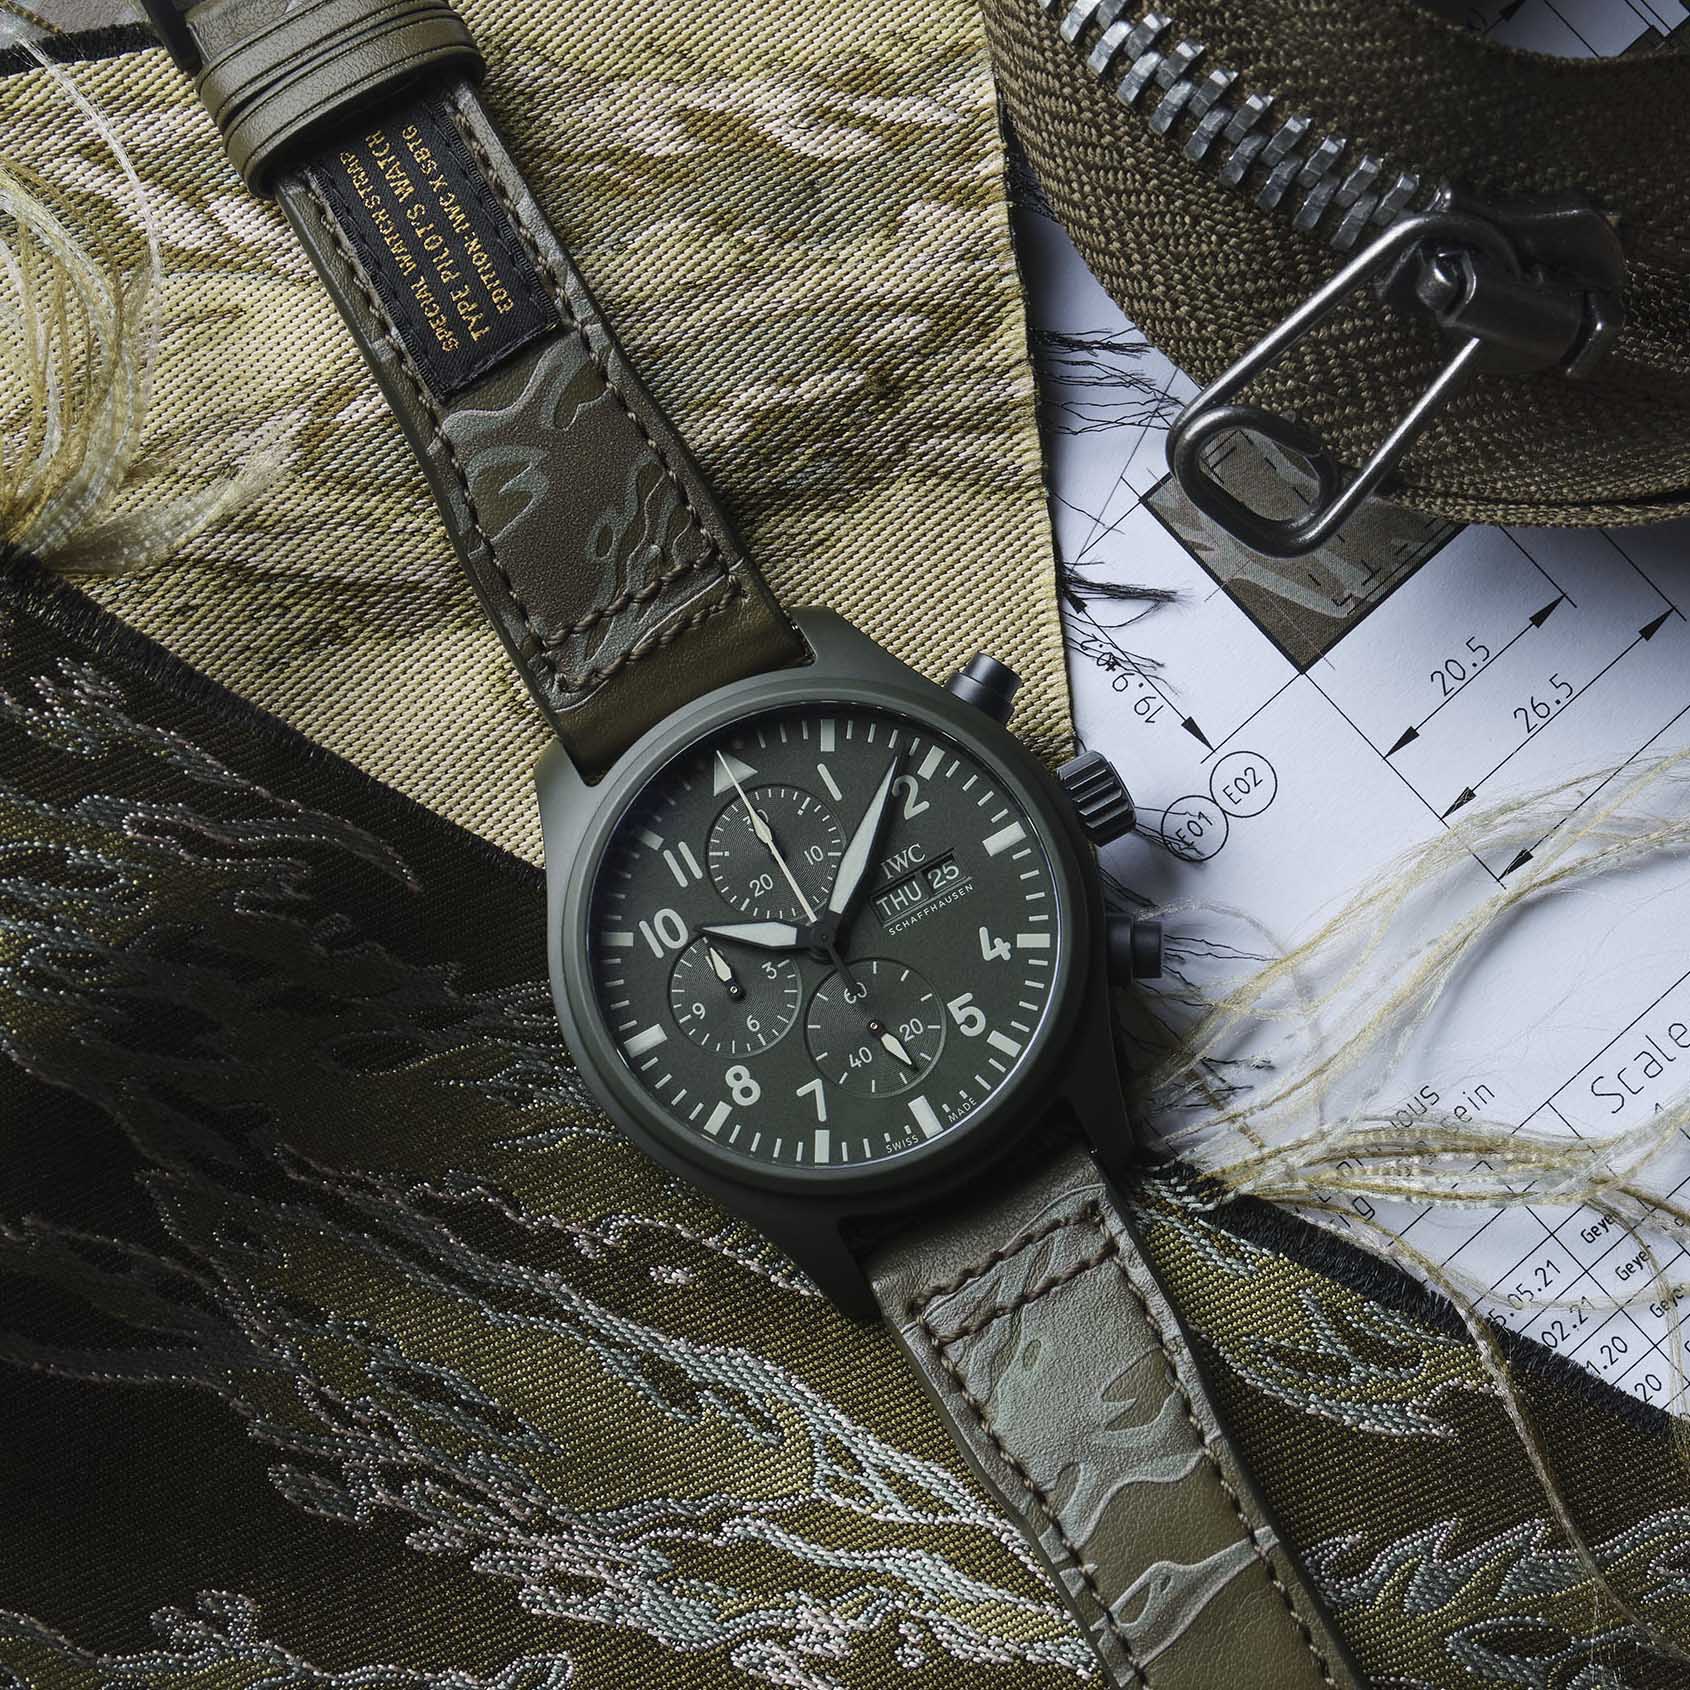 IWC collaborate with Mr Sabotage on special-edition camouflage strap